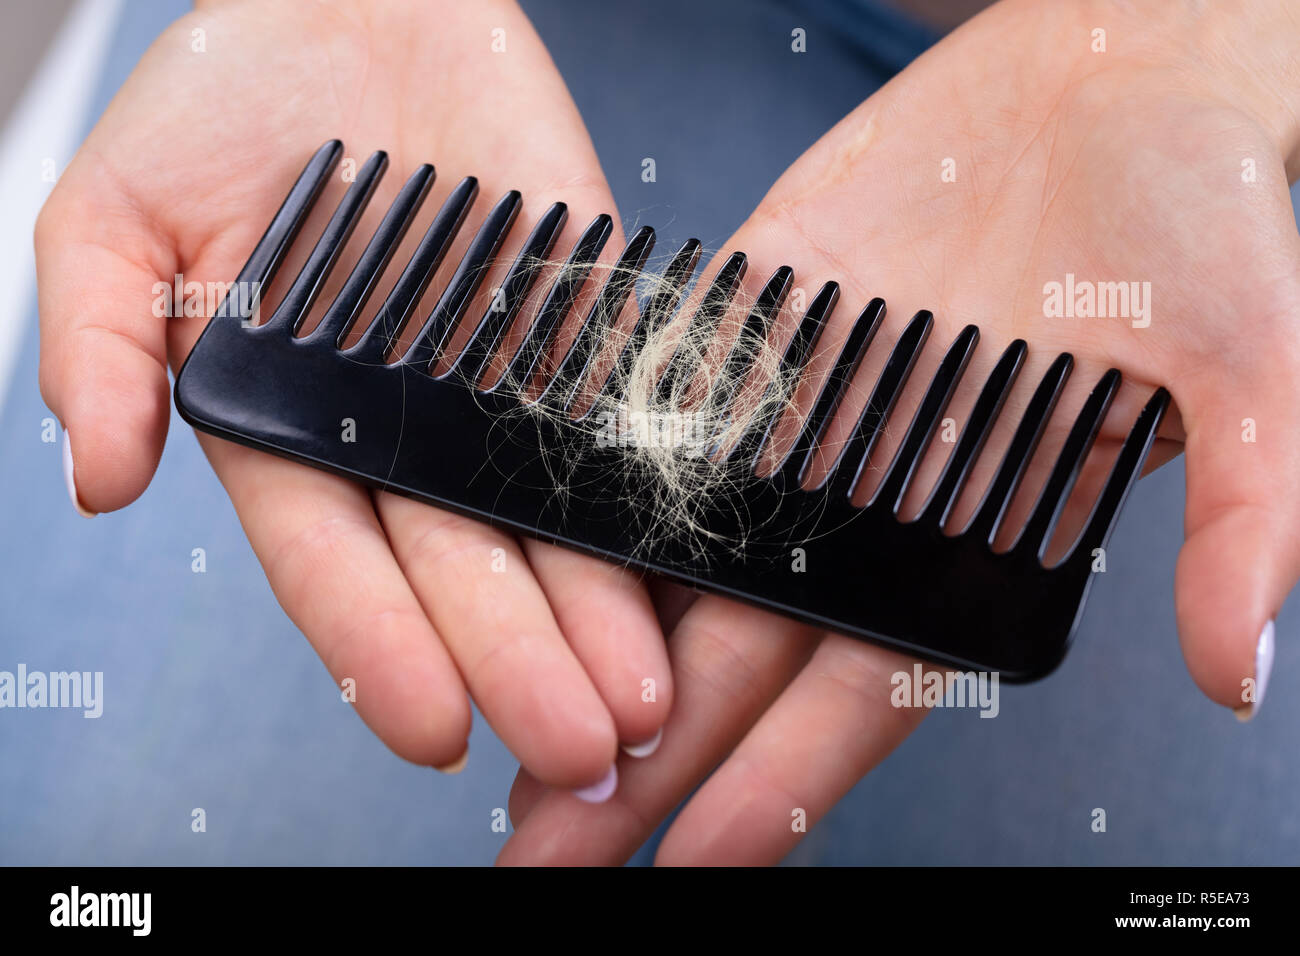 Close-up Of A Woman's Hand Holding Comb With Hair Loss Stock Photo